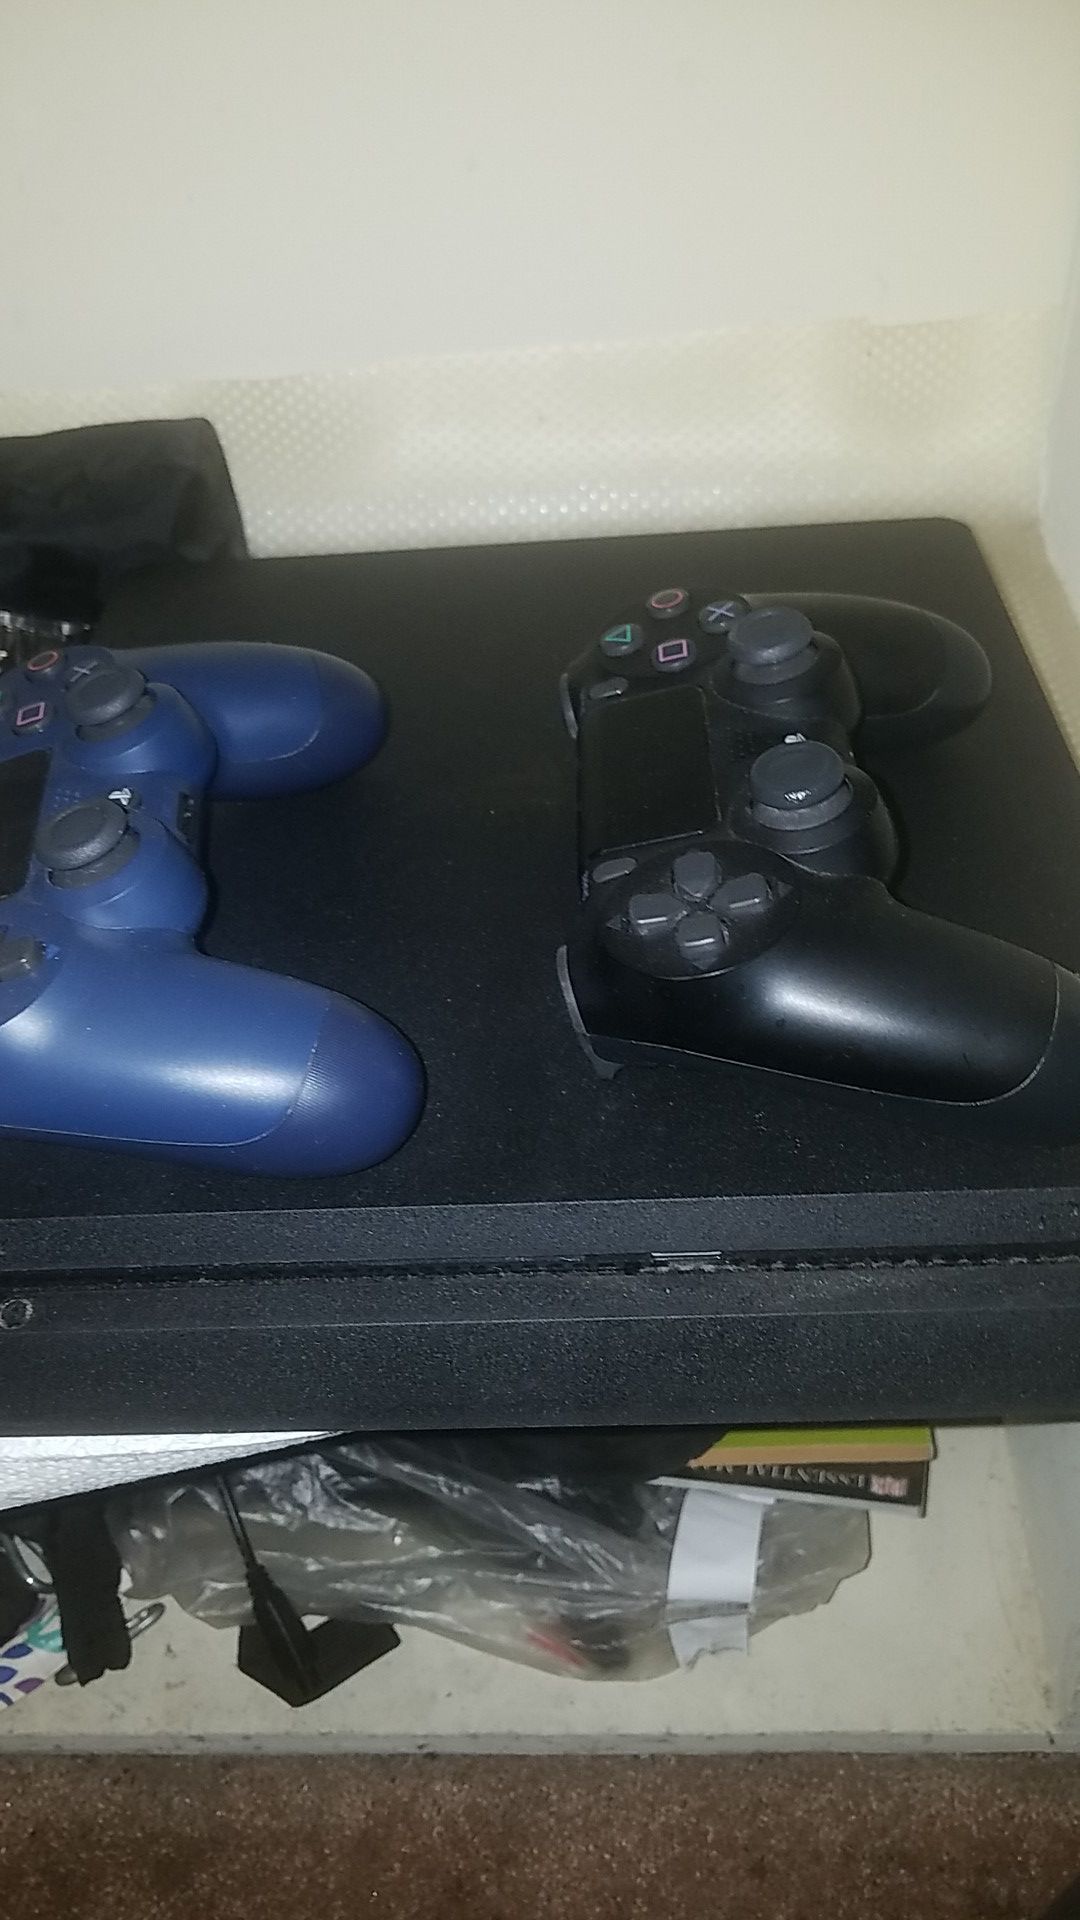 Slightly used ps4 1tb with all cables and accessories